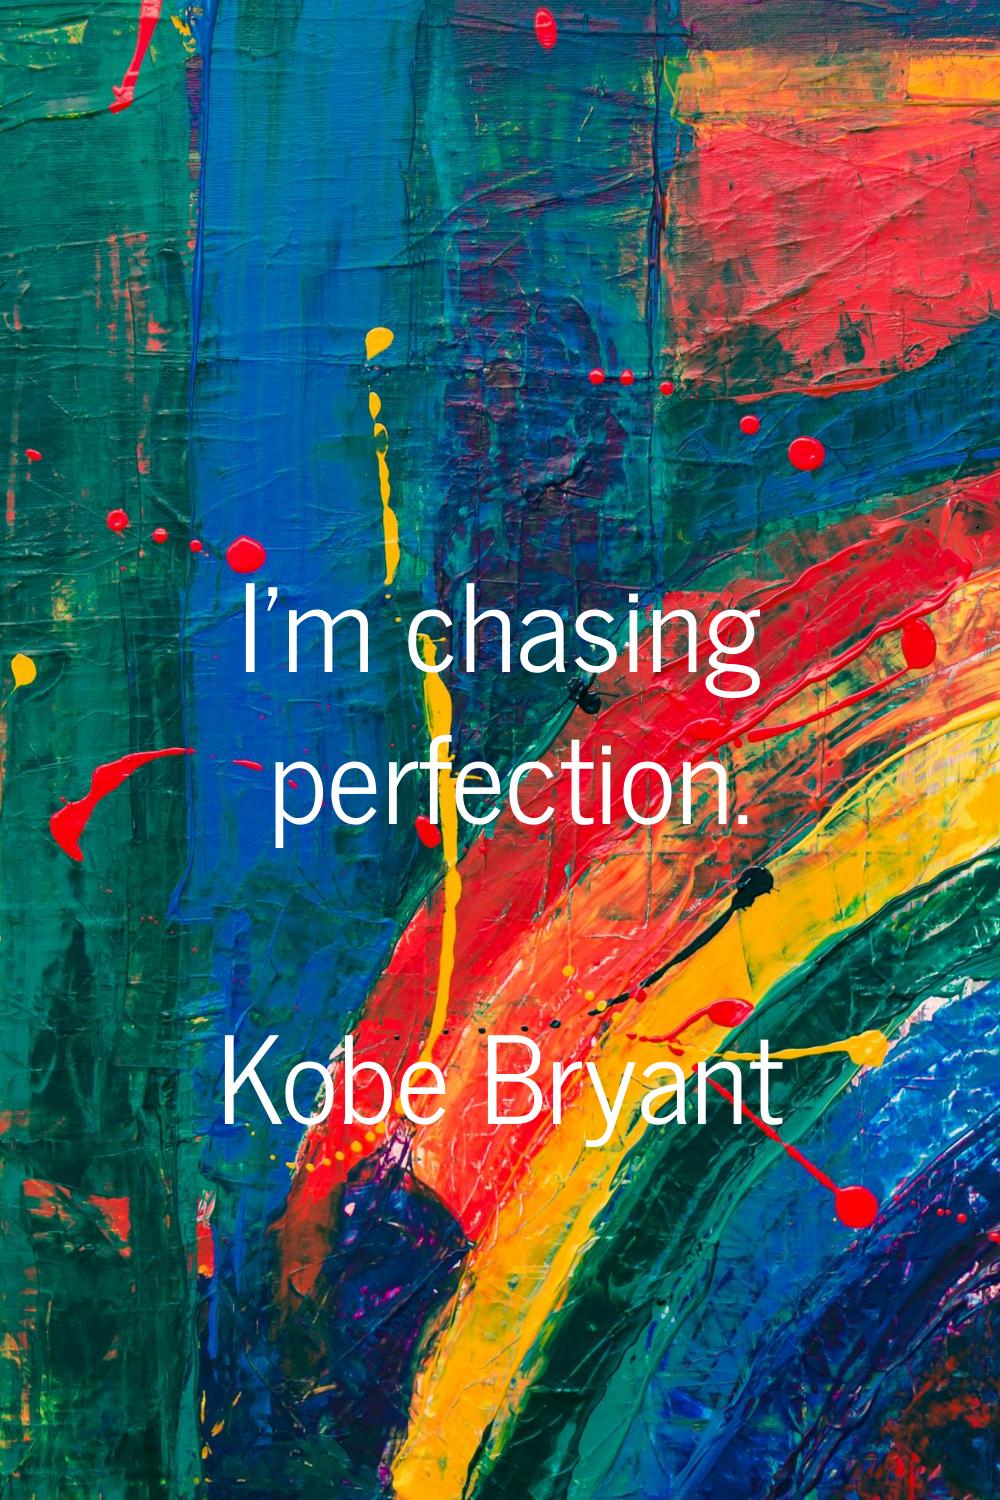 I'm chasing perfection.